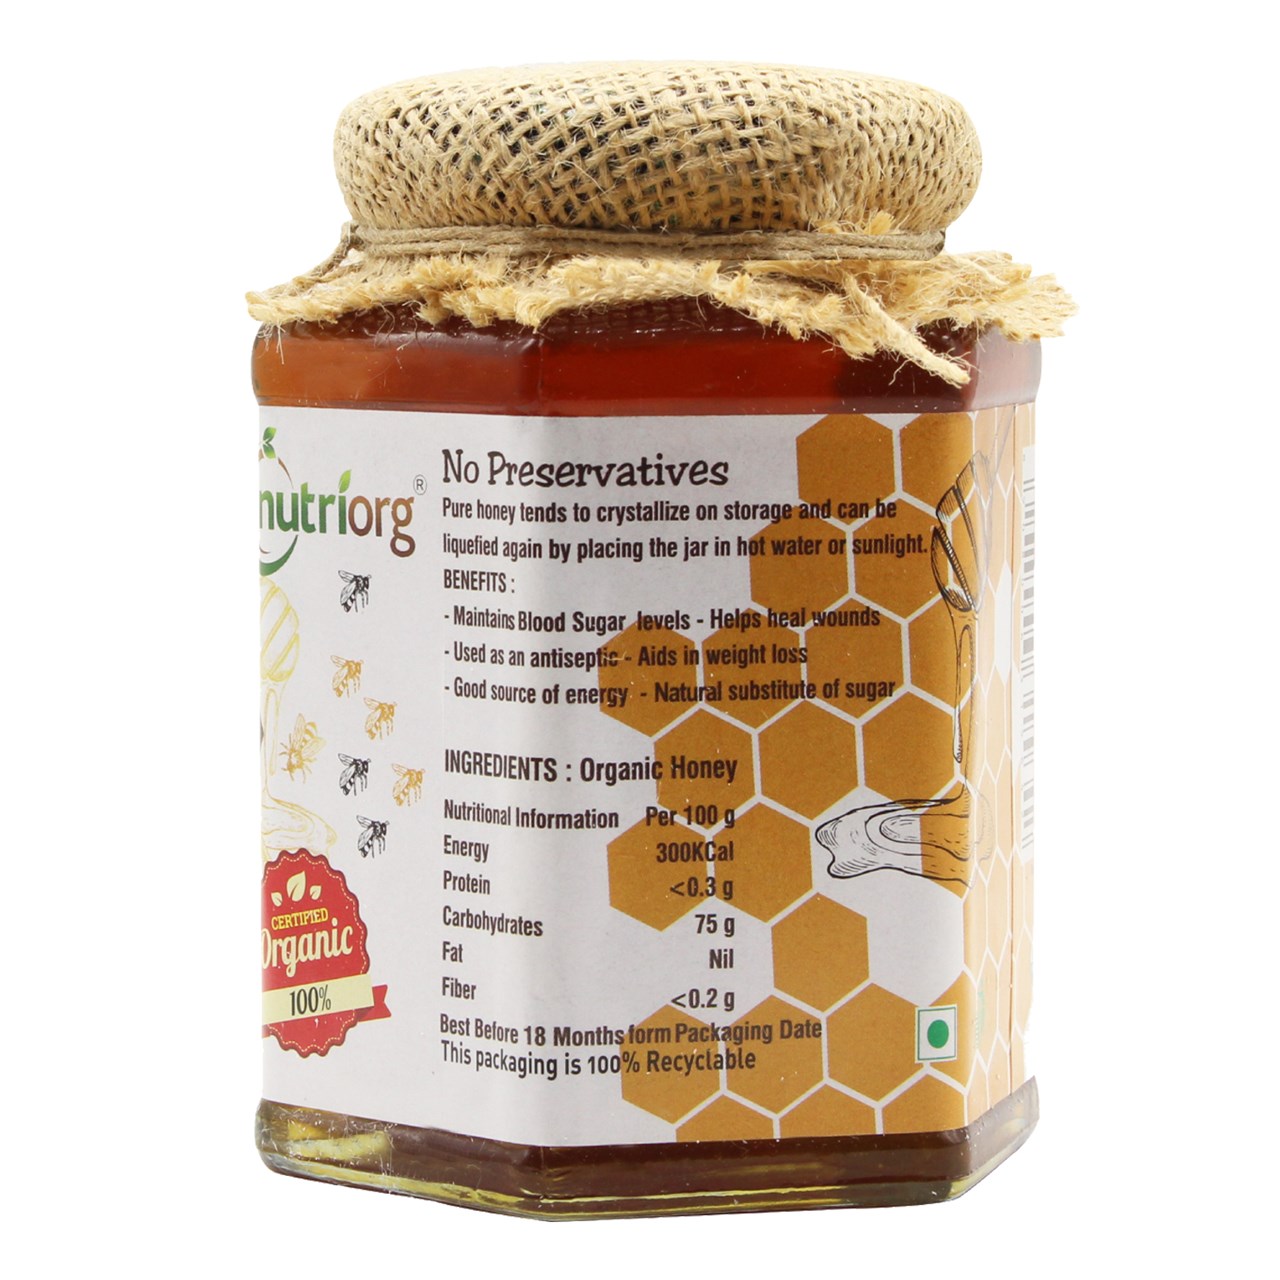 Picture of Nutriorg Certified Organic High Altitude Honey 500g